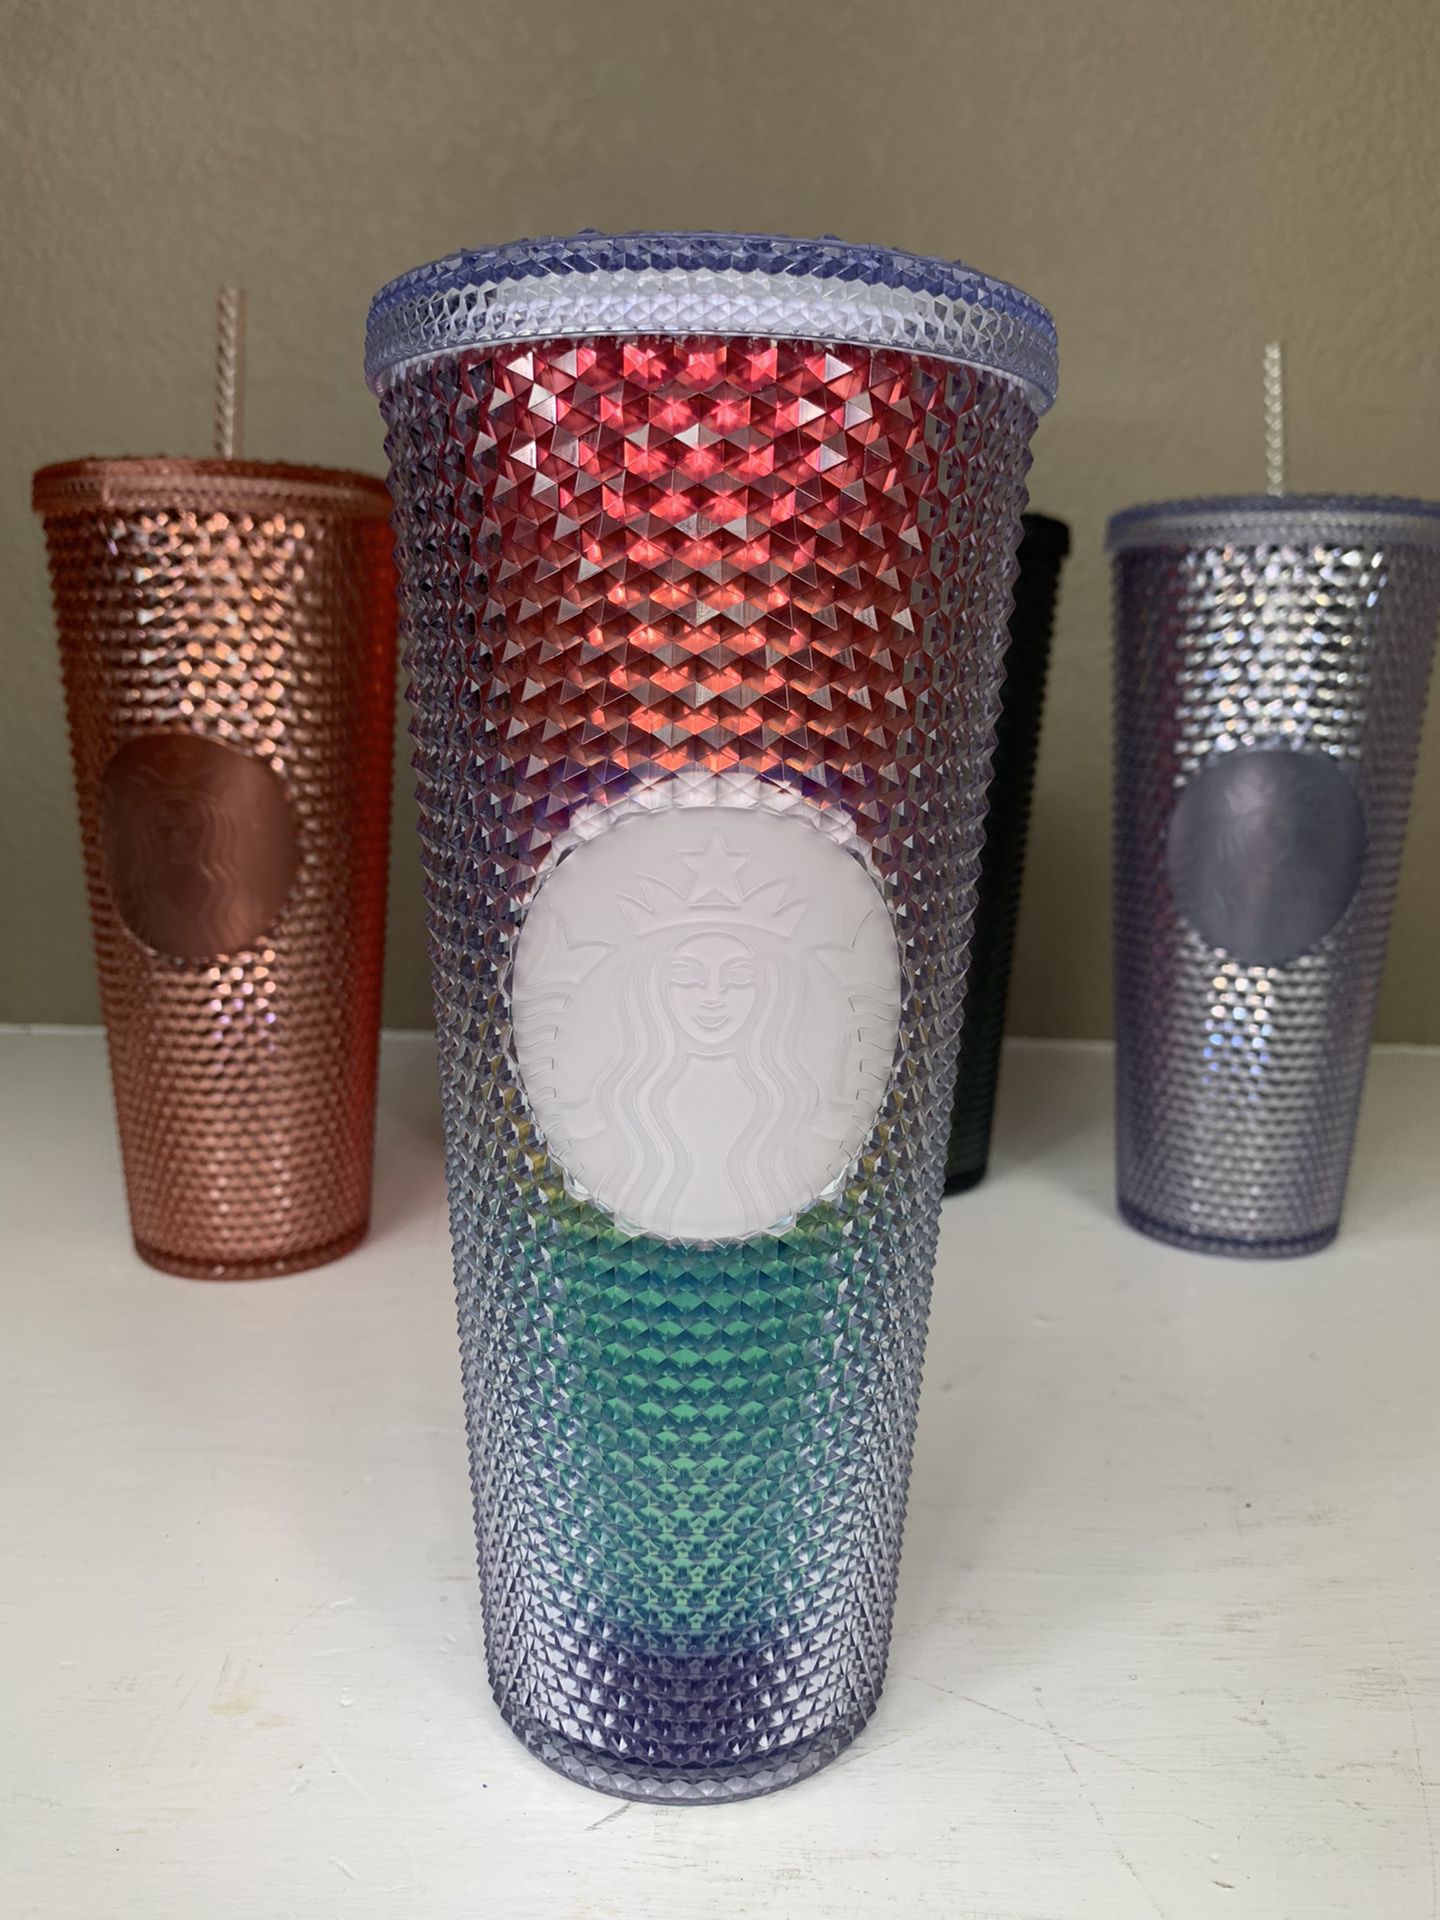 Starbucks Gold Studded 2022 Holiday Cup for Sale in Moorpark, CA - OfferUp